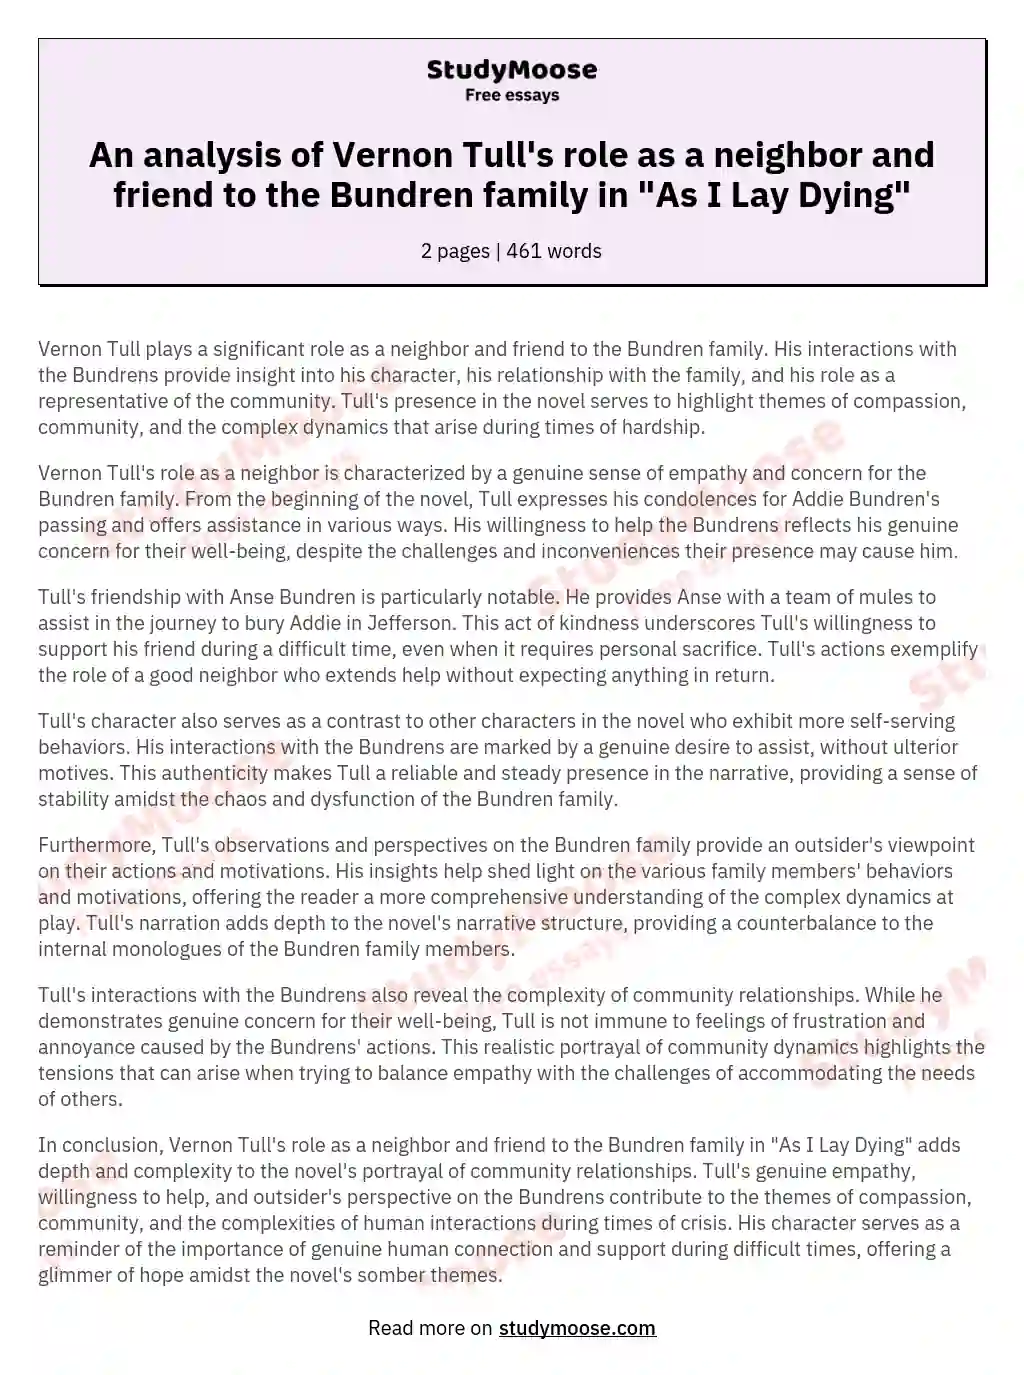 An analysis of Vernon Tull's role as a neighbor and friend to the Bundren family in "As I Lay Dying" essay